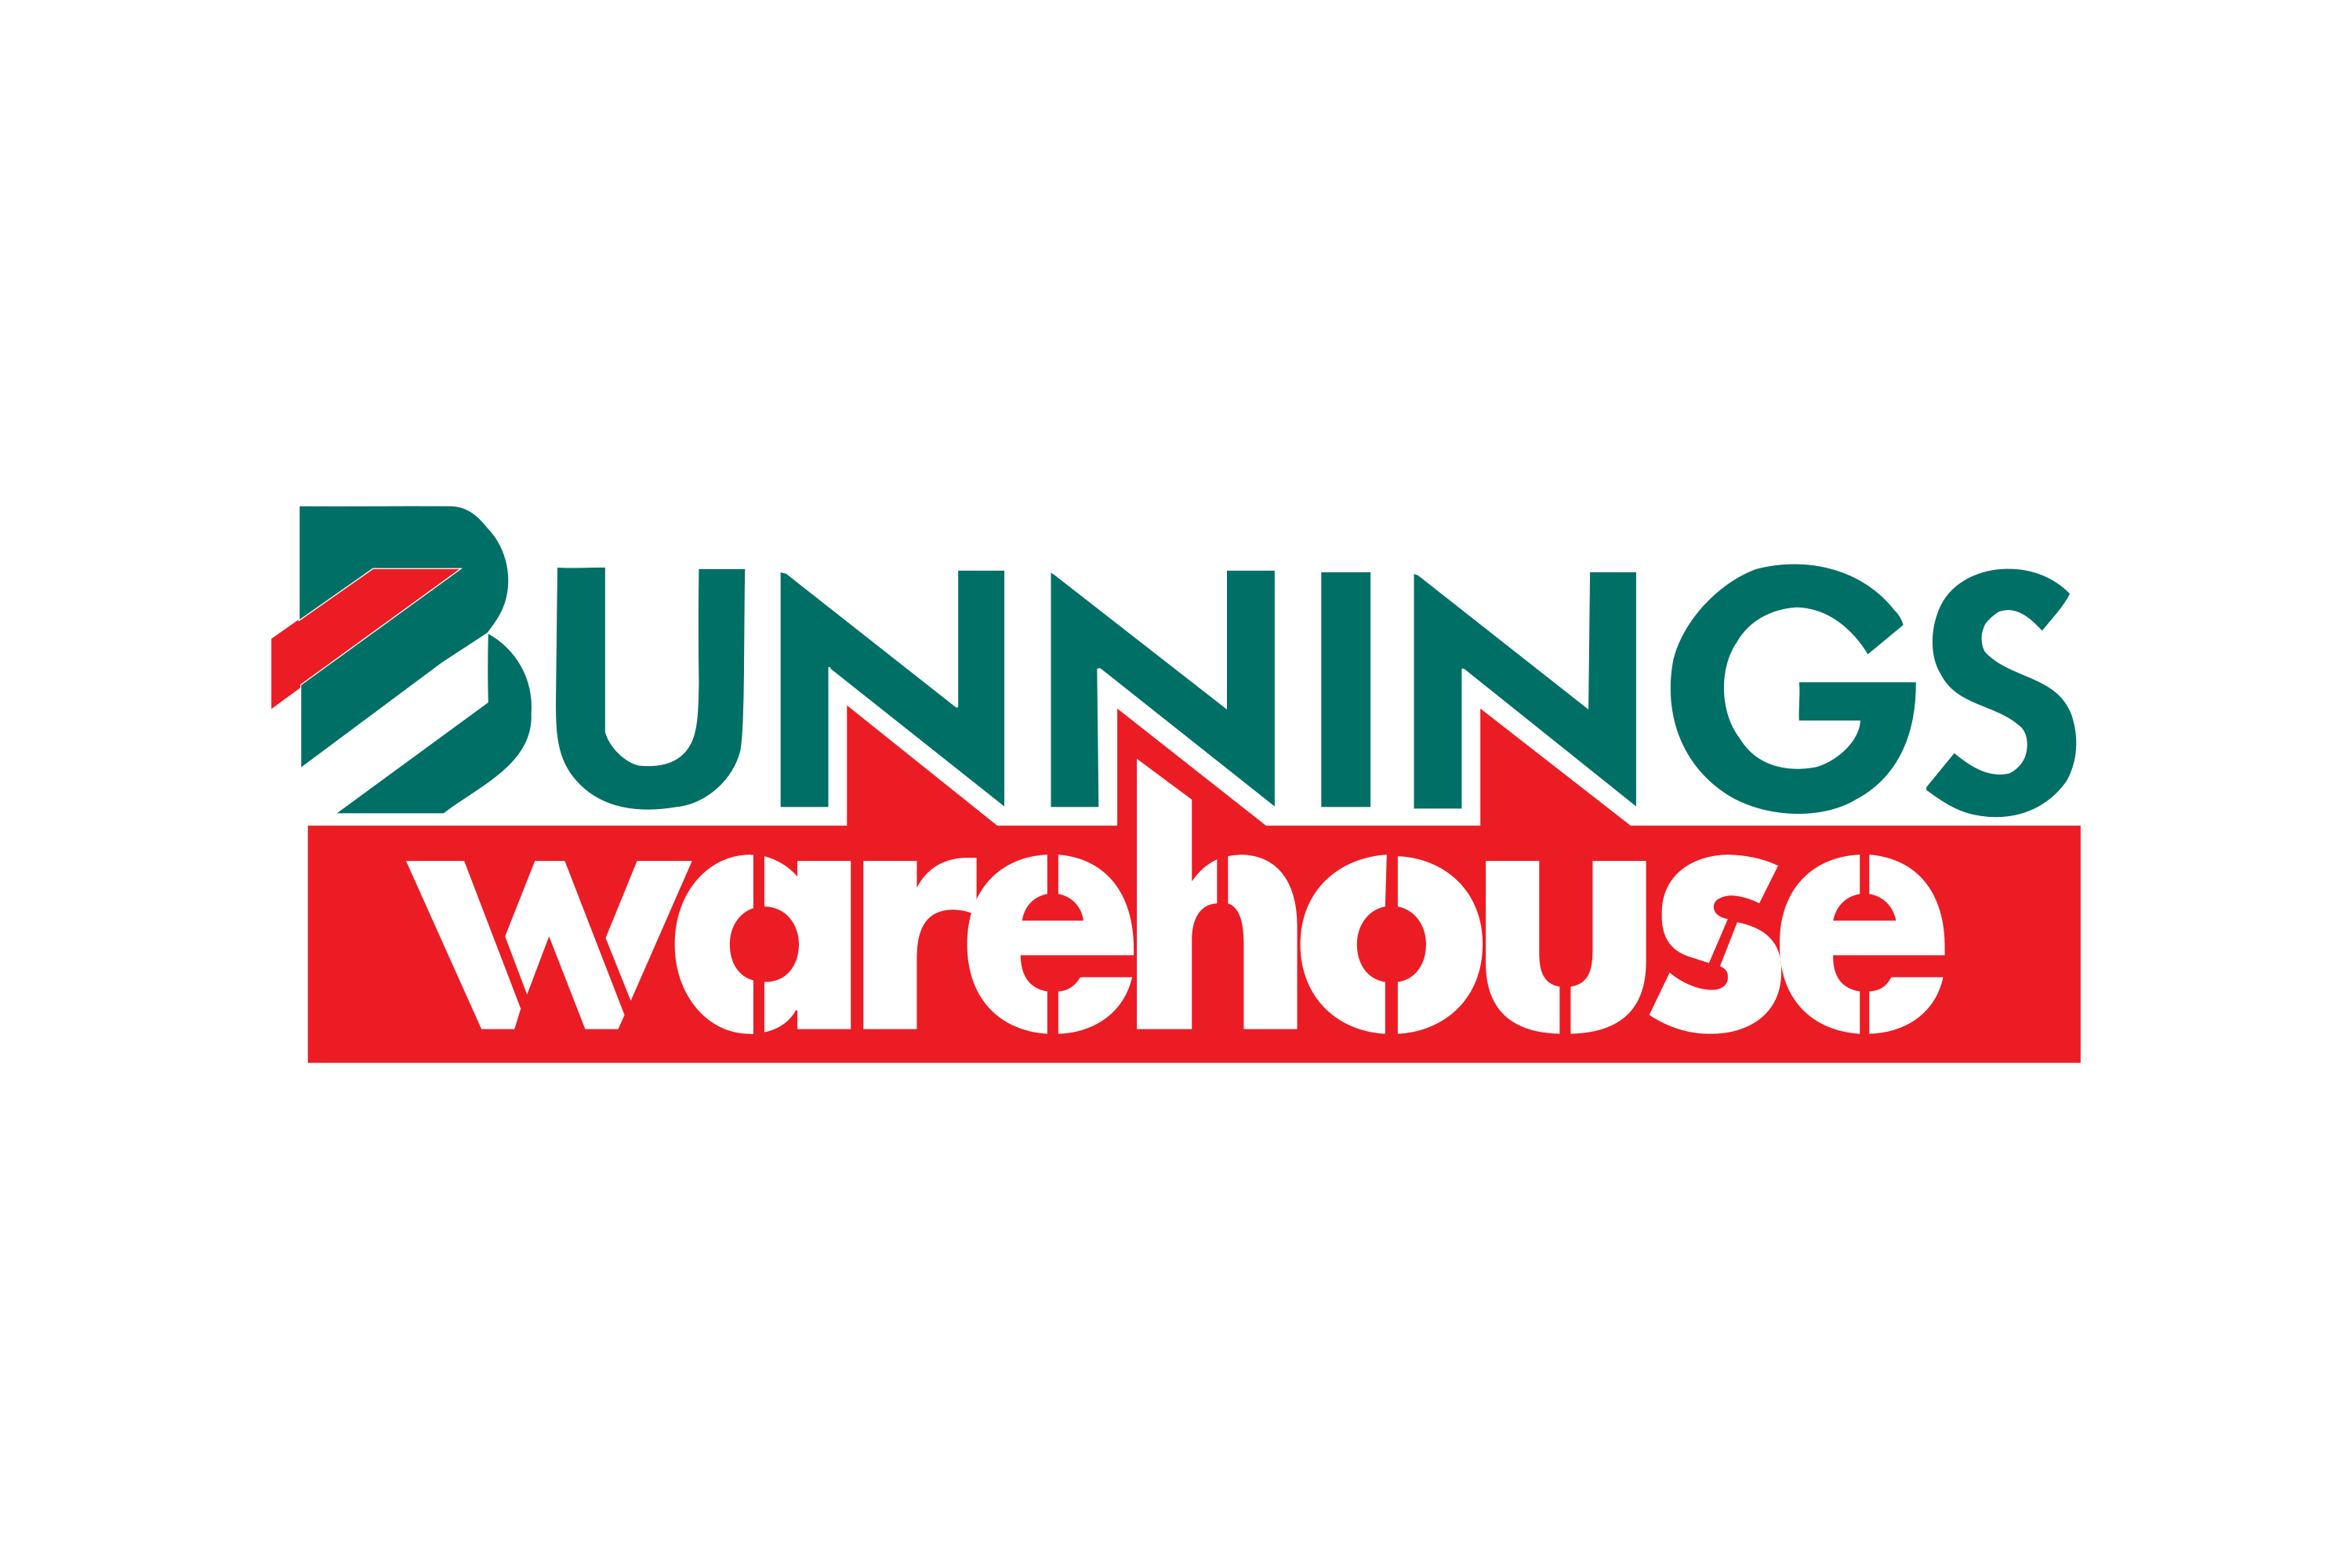 Download Bunnings Group (Bunnings Warehouse) Logo in SVG Vector or PNG